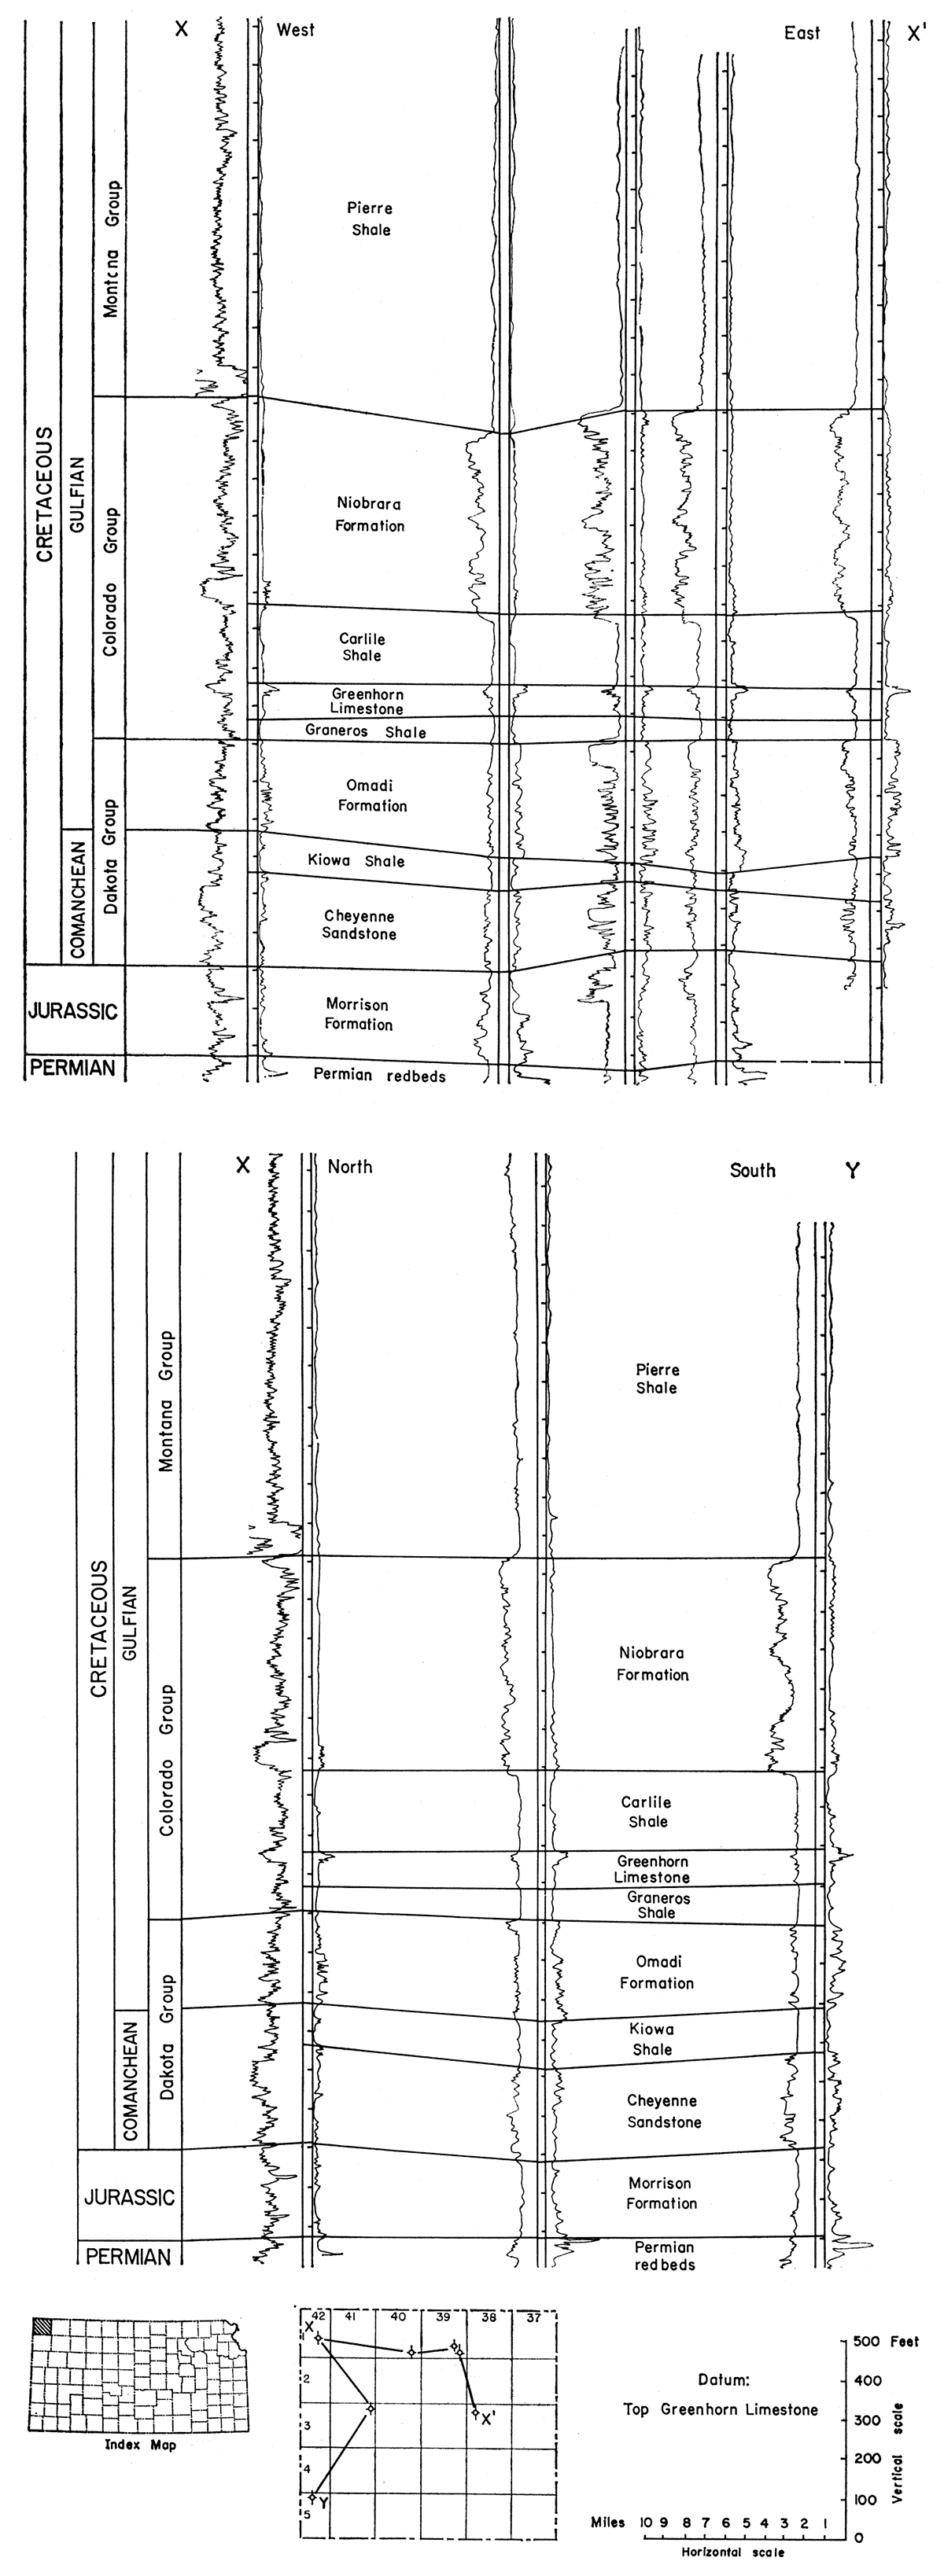 Electric-log sections showing stratigraphic relations of Mesozoic rock units in Cheyenne County, Kansas.